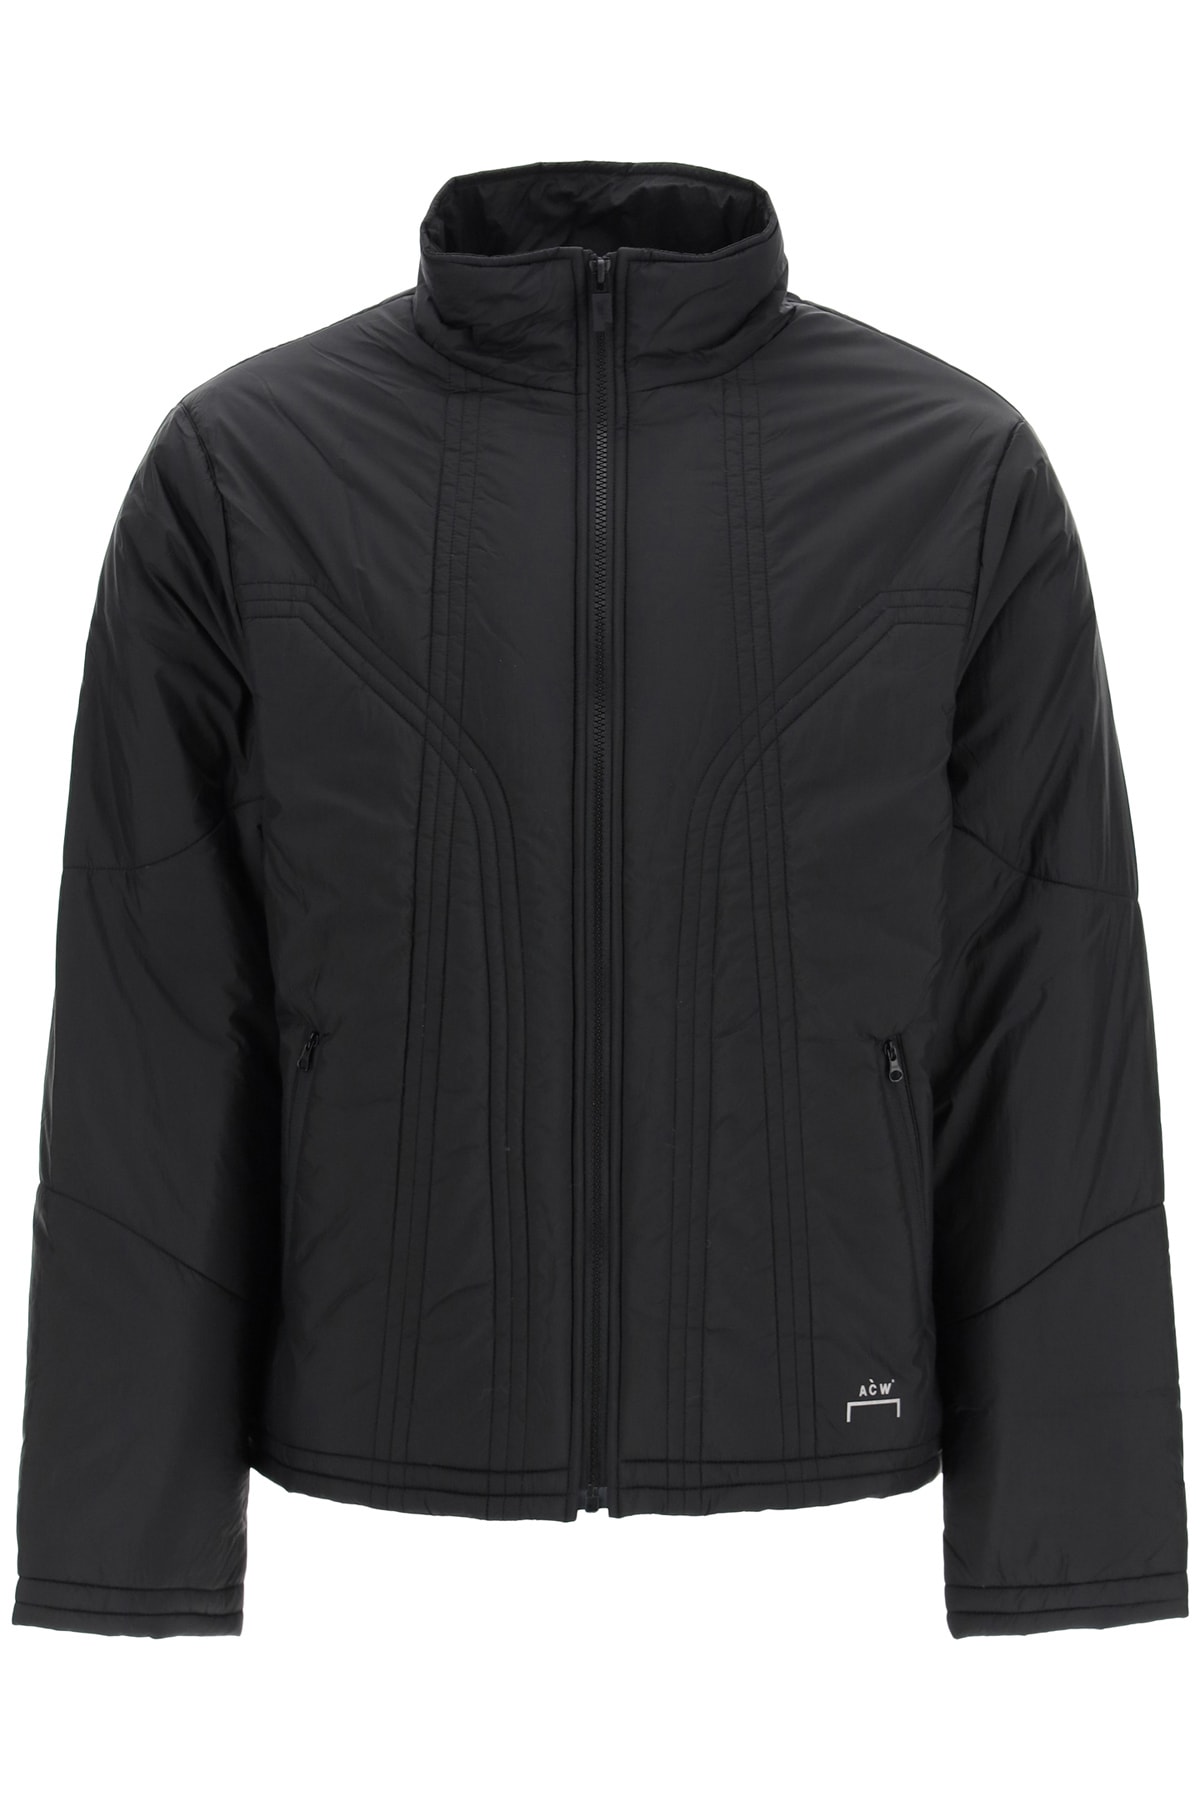 A-COLD-WALL Crinkle Puffer Jacket